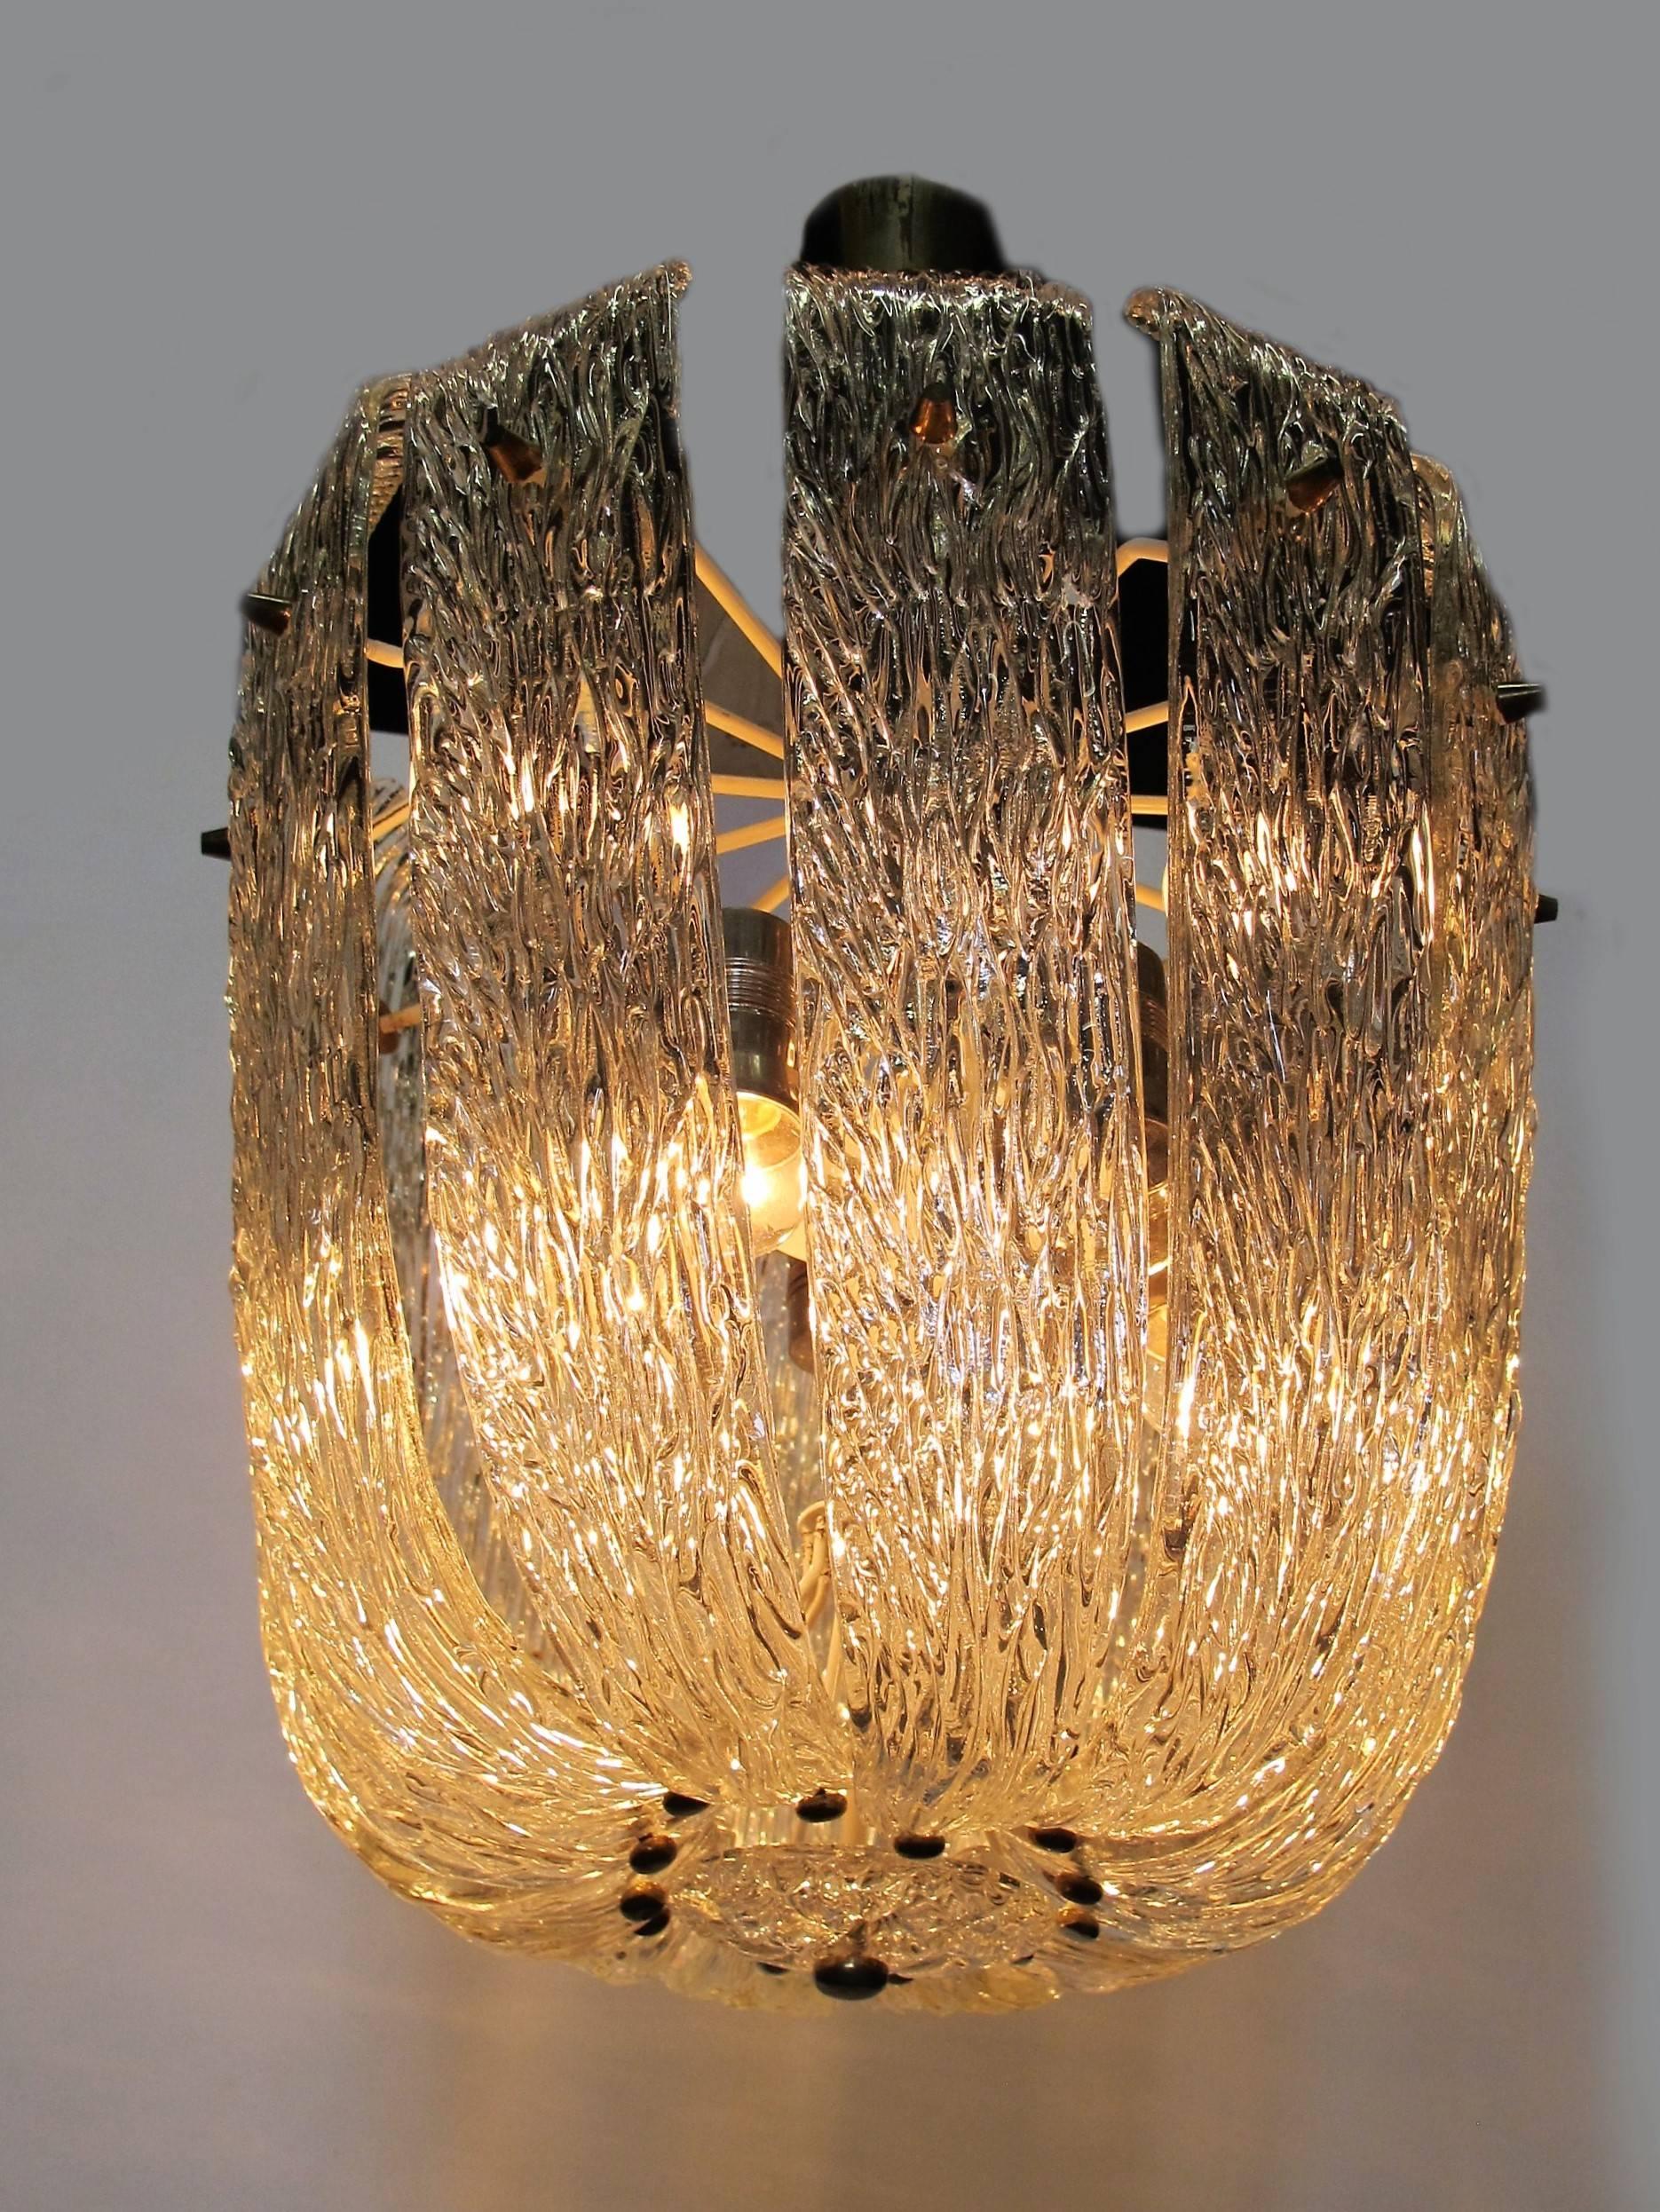 Impressive chandelier by the Austrian armature designer J.T. Kalmar, Vienna. The lamp is composed of elegantly curved and textured clear glass with brass detailing.

The lamp is in excellent condition with working lights.

Height of whole lamp: 65